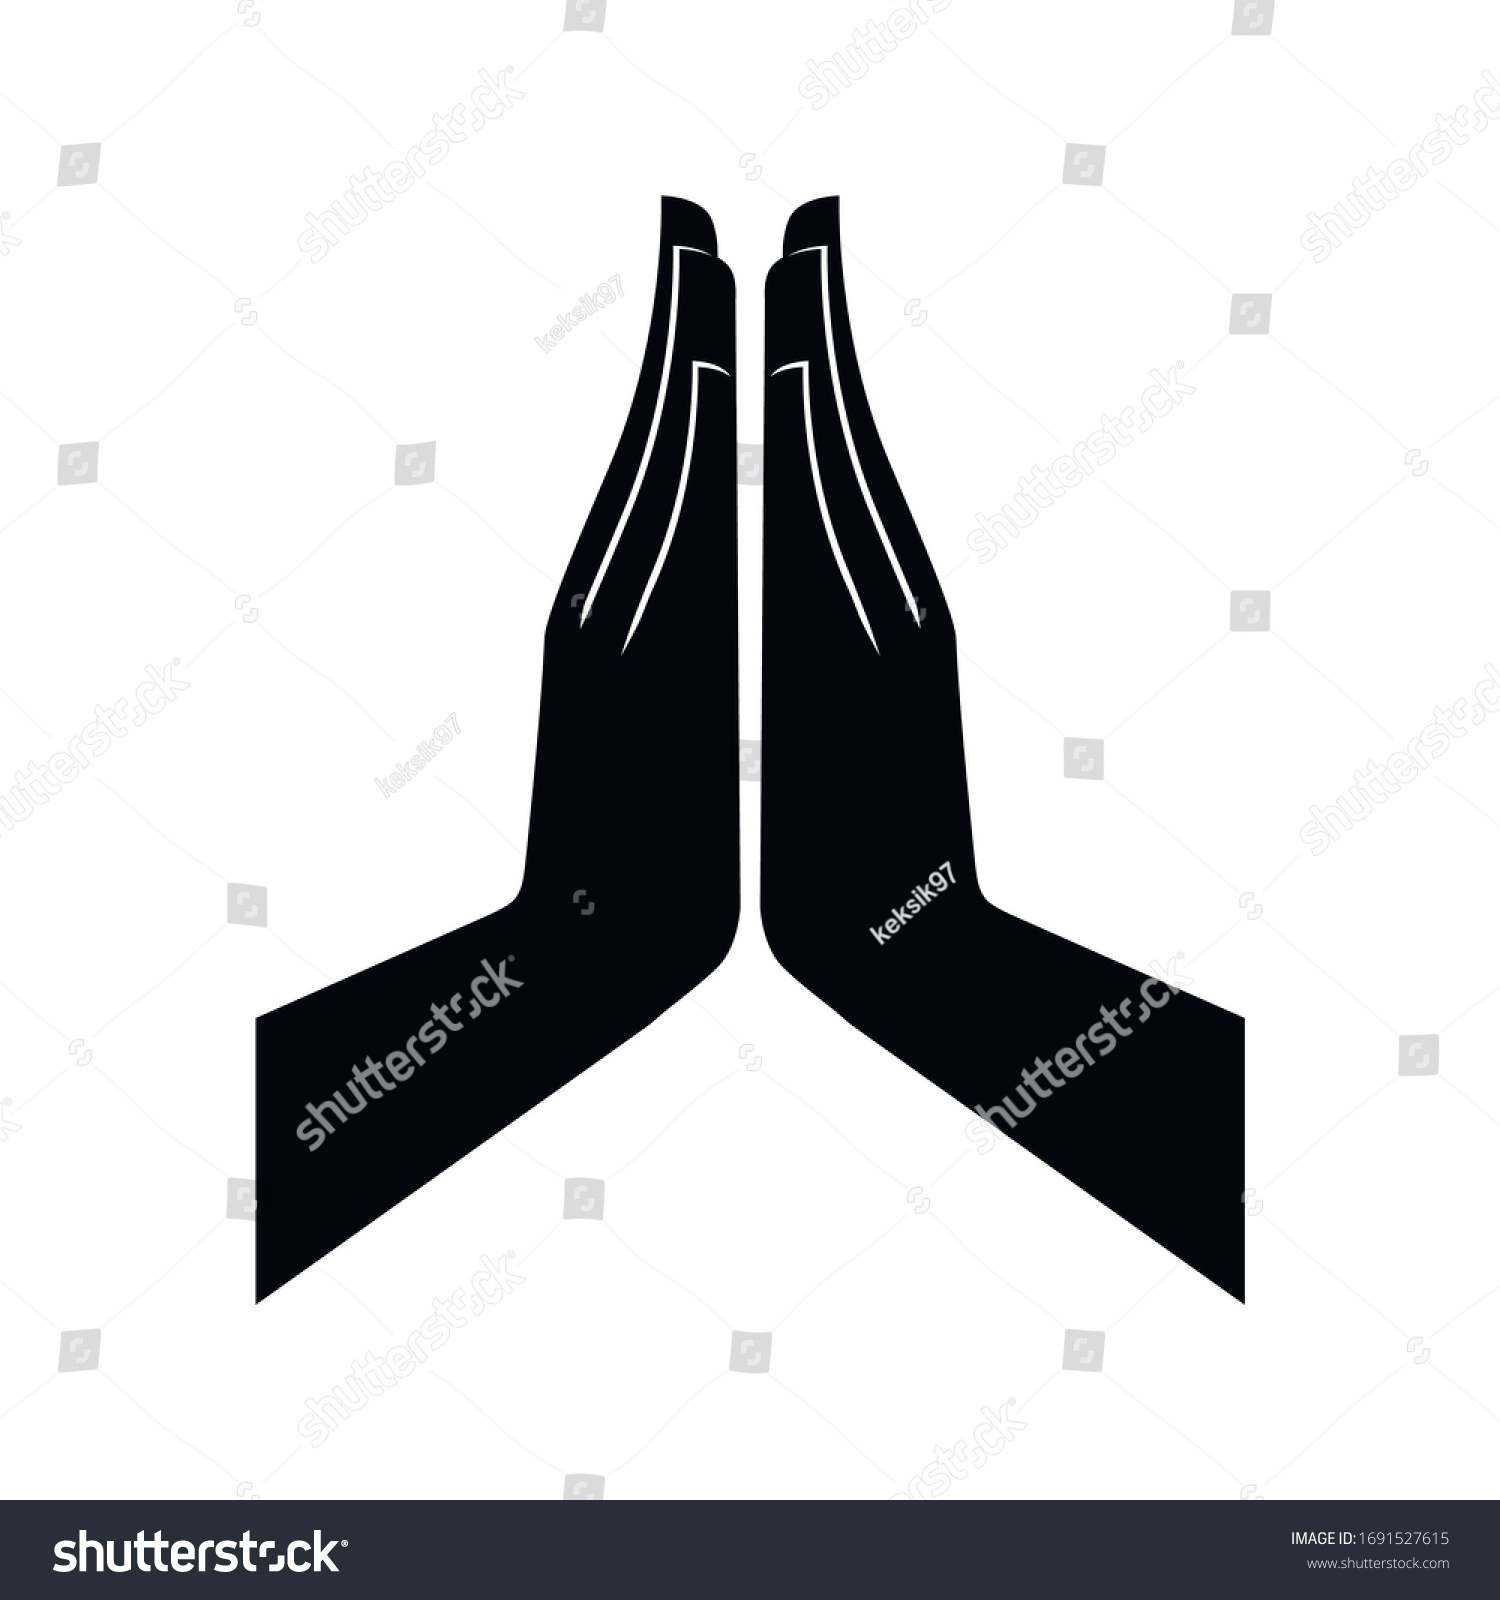 24,422 Hands praying silhouette Images, Stock Photos & Vectors ...